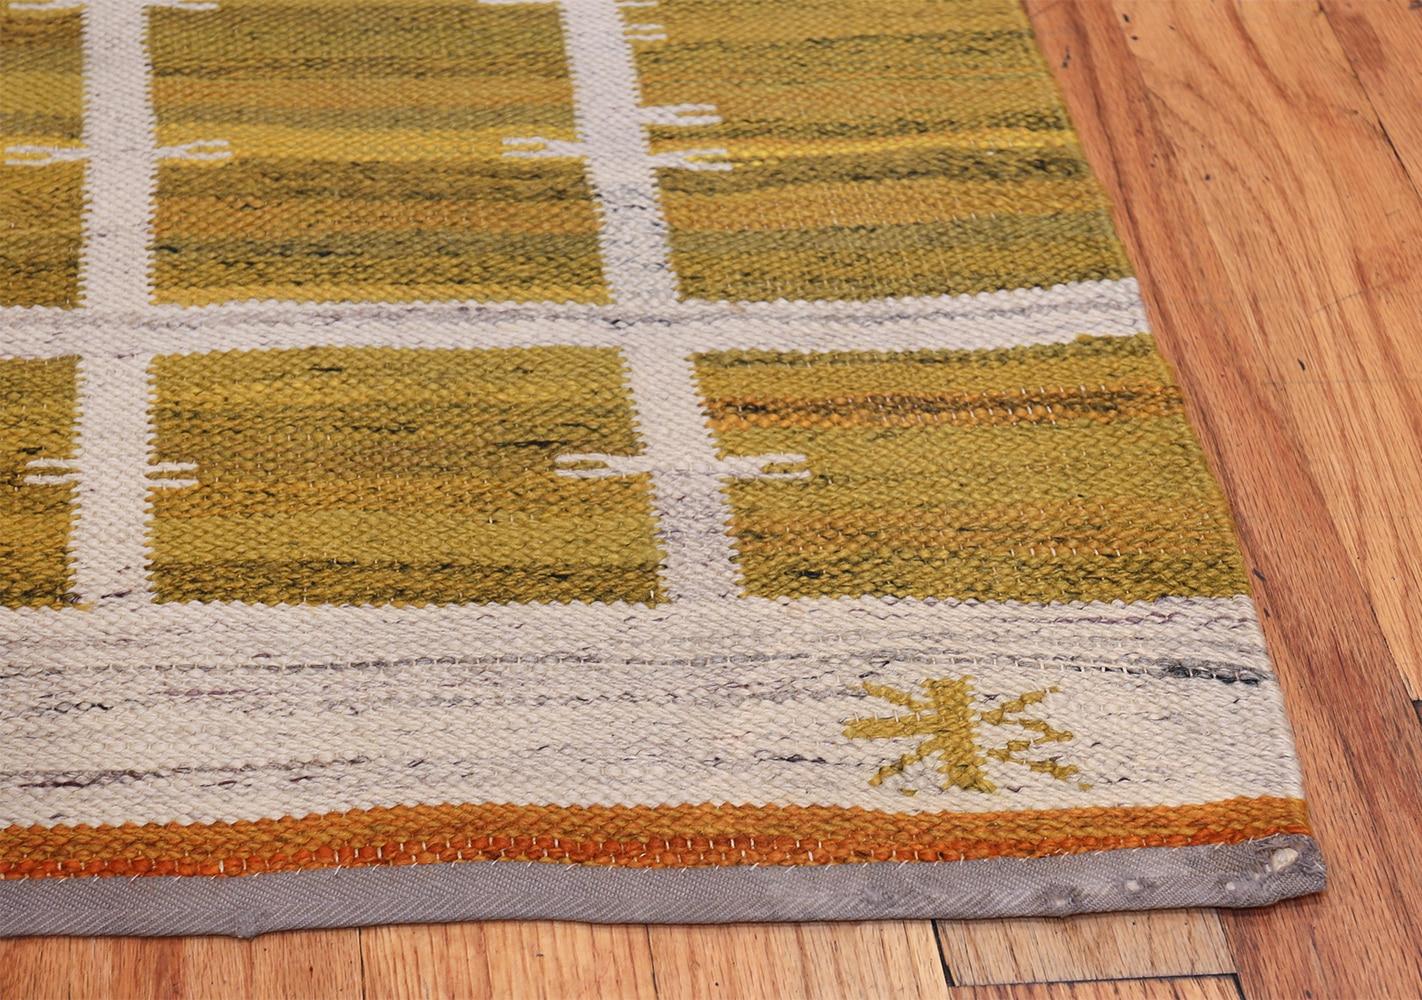 Hand-Woven Vintage Scandinavian Gold Rug. Size: 4 ft 8 in x 6 ft 7 in (1.42 m x 2.01 m)